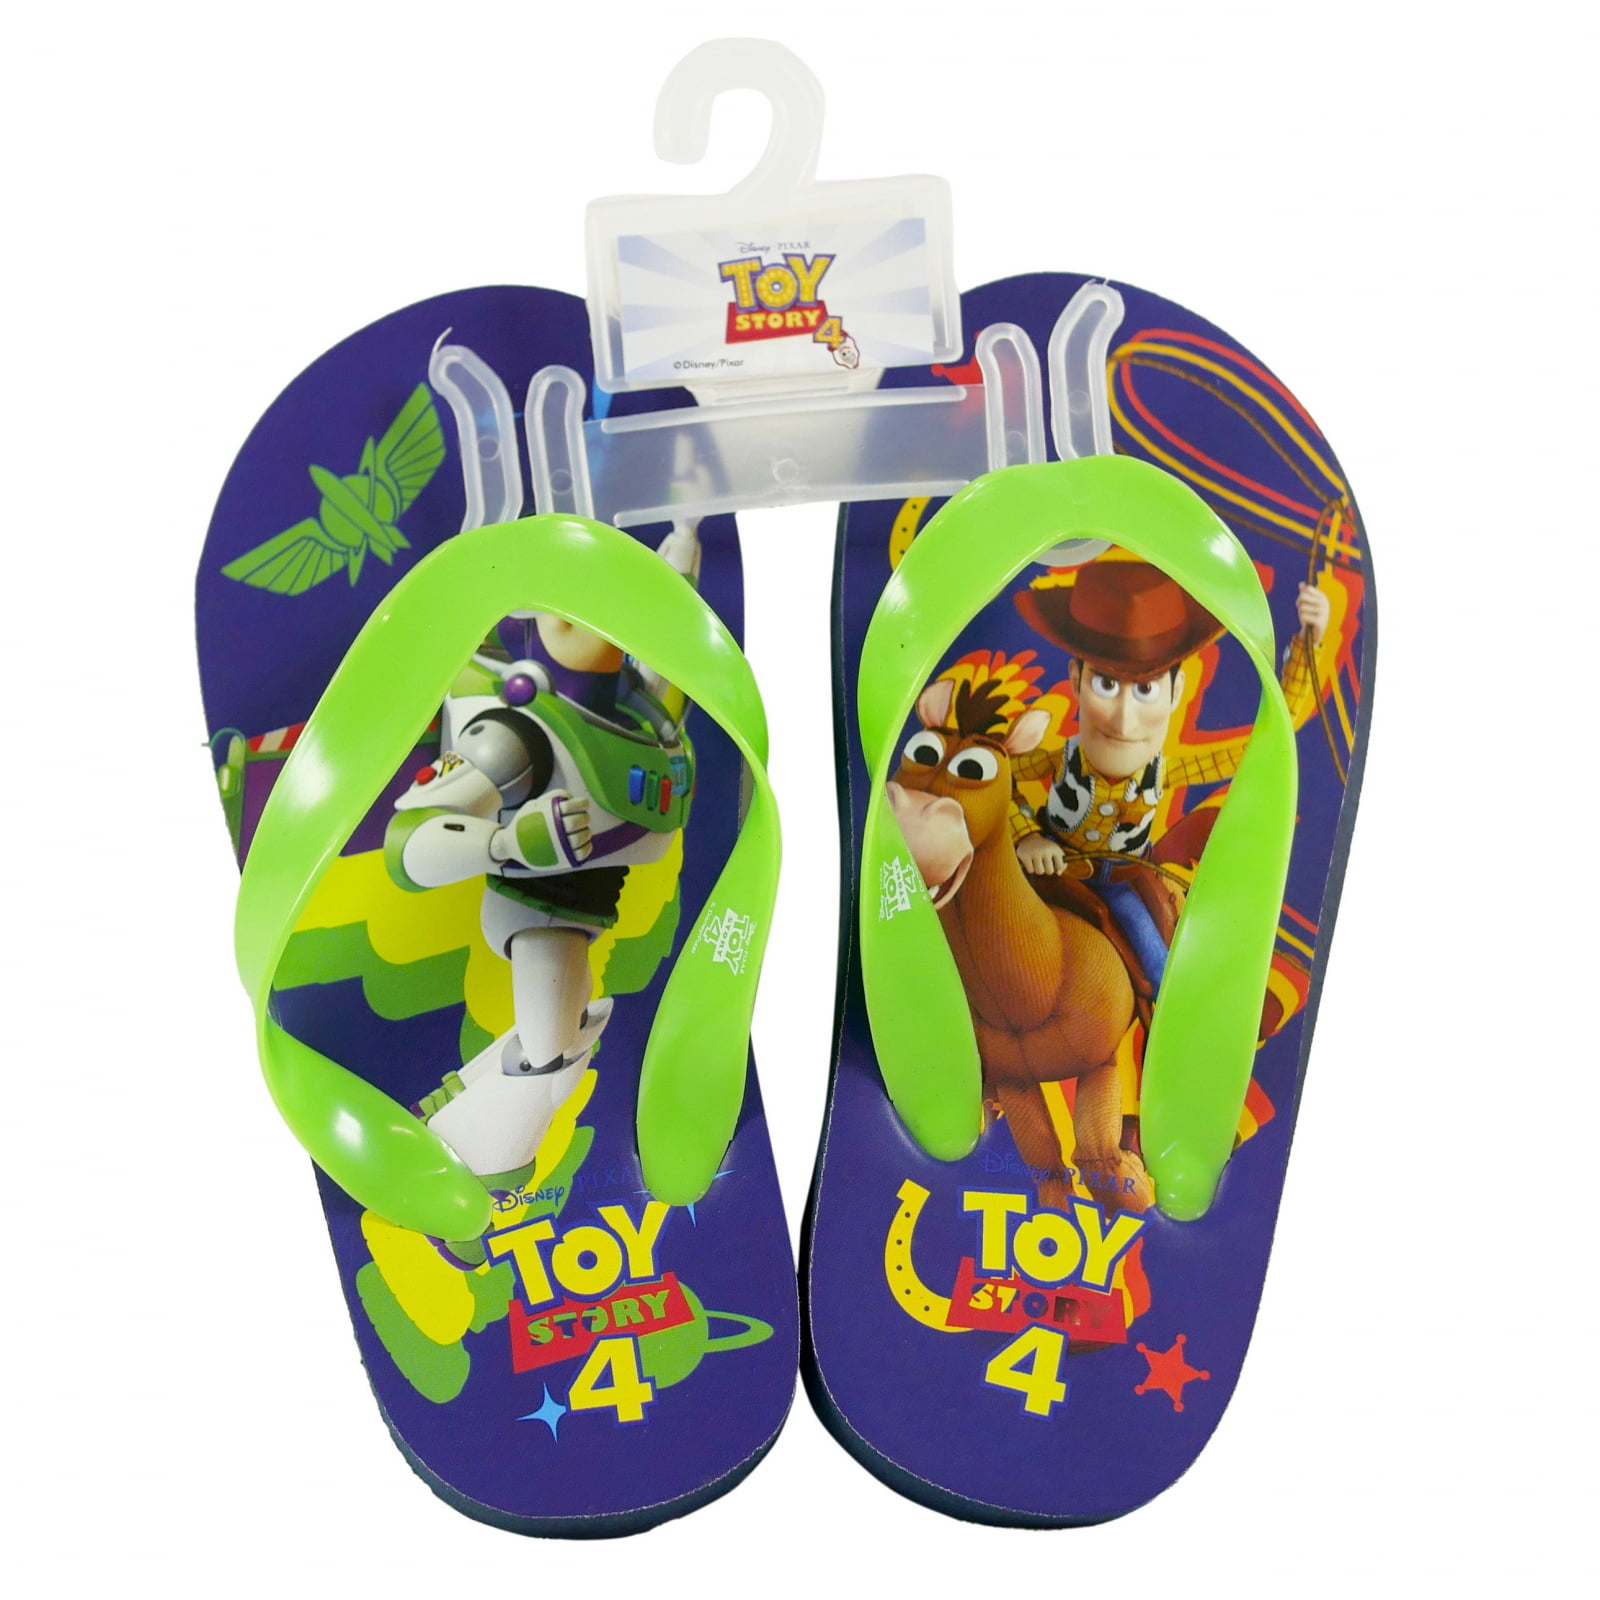 Toy Story 4 Sandals UK Size 9 